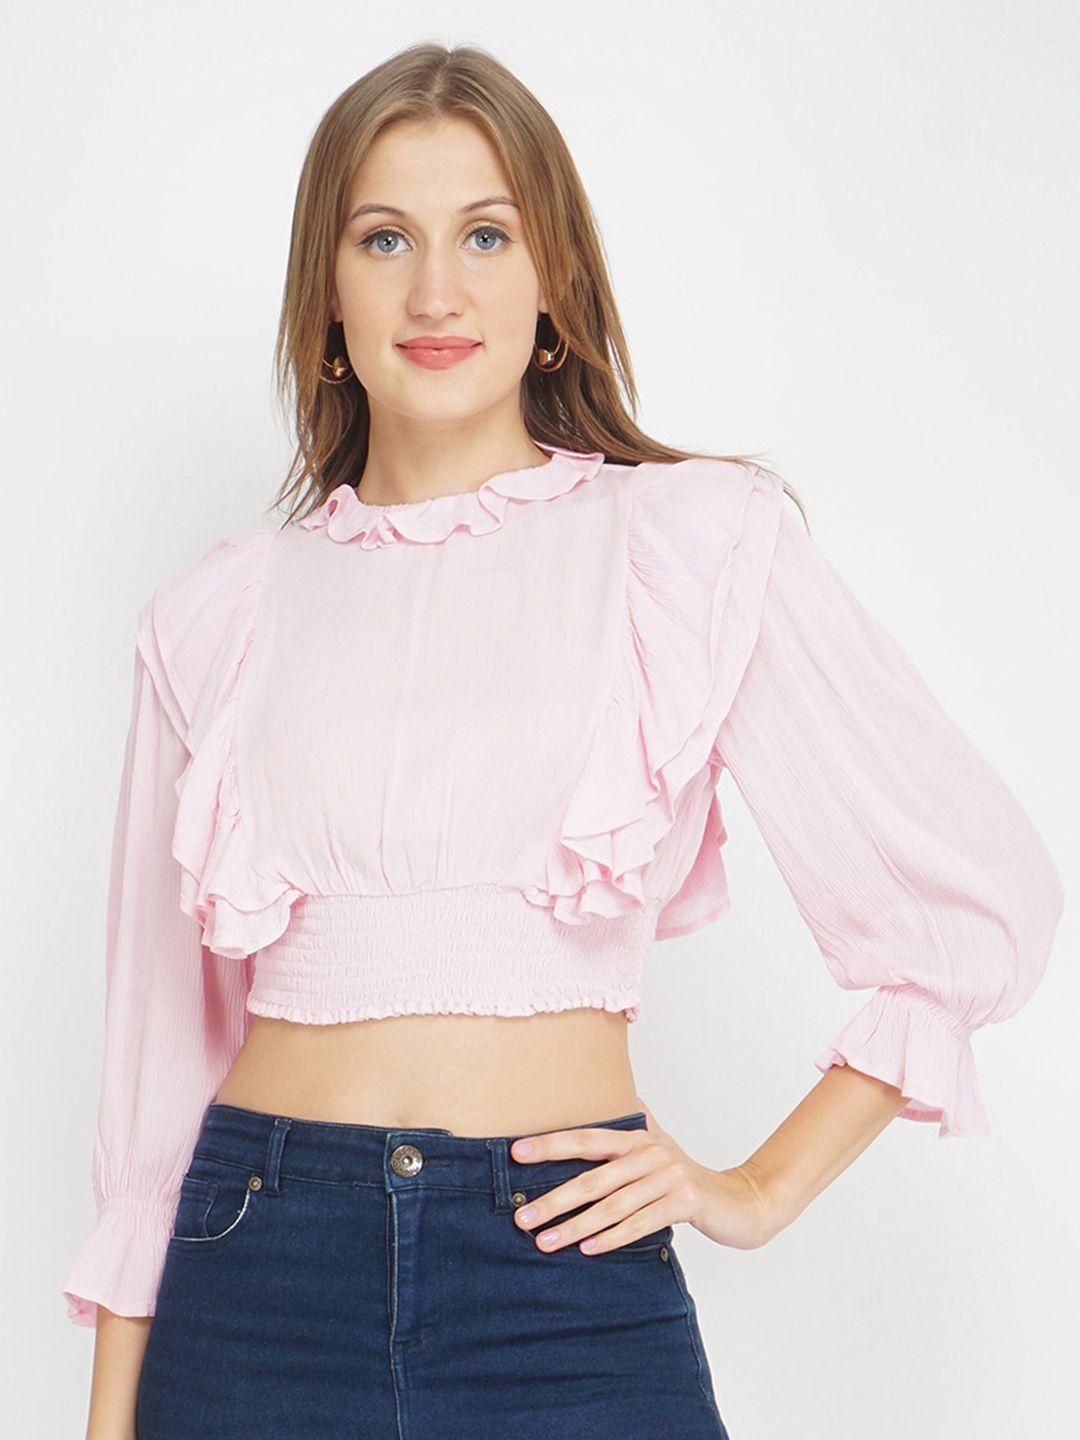 oxolloxo pink ruffles crepe styled back crop top